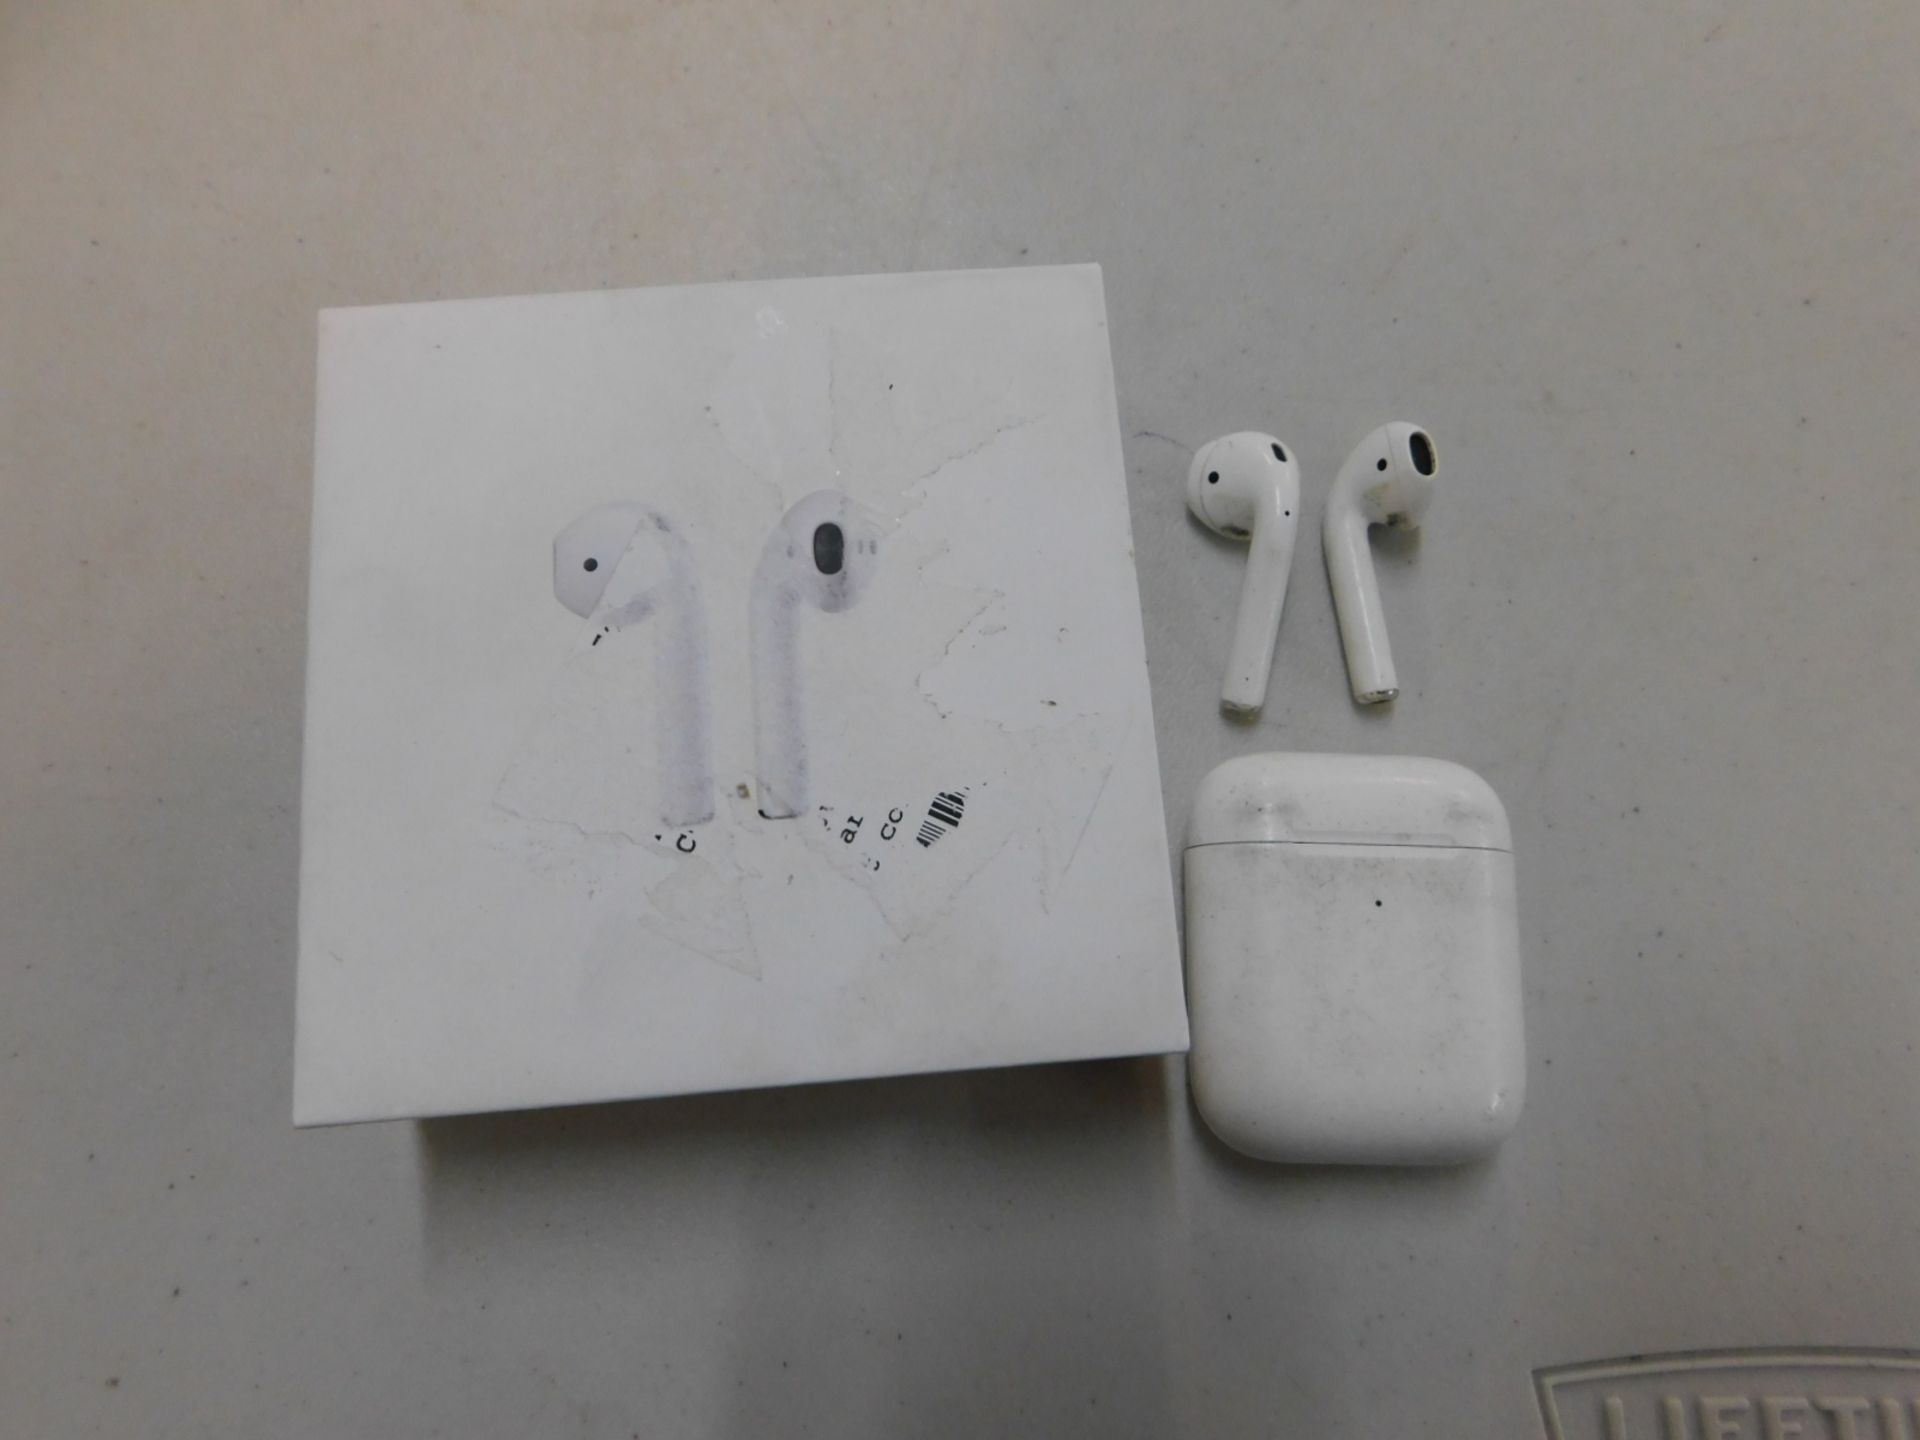 1 BOXED PAIR OF APPLE AIRPODS 2ND GENERATION BLUETOOTH EARPHONES WITH WIRLESS CHARGING CASE RRP Â£